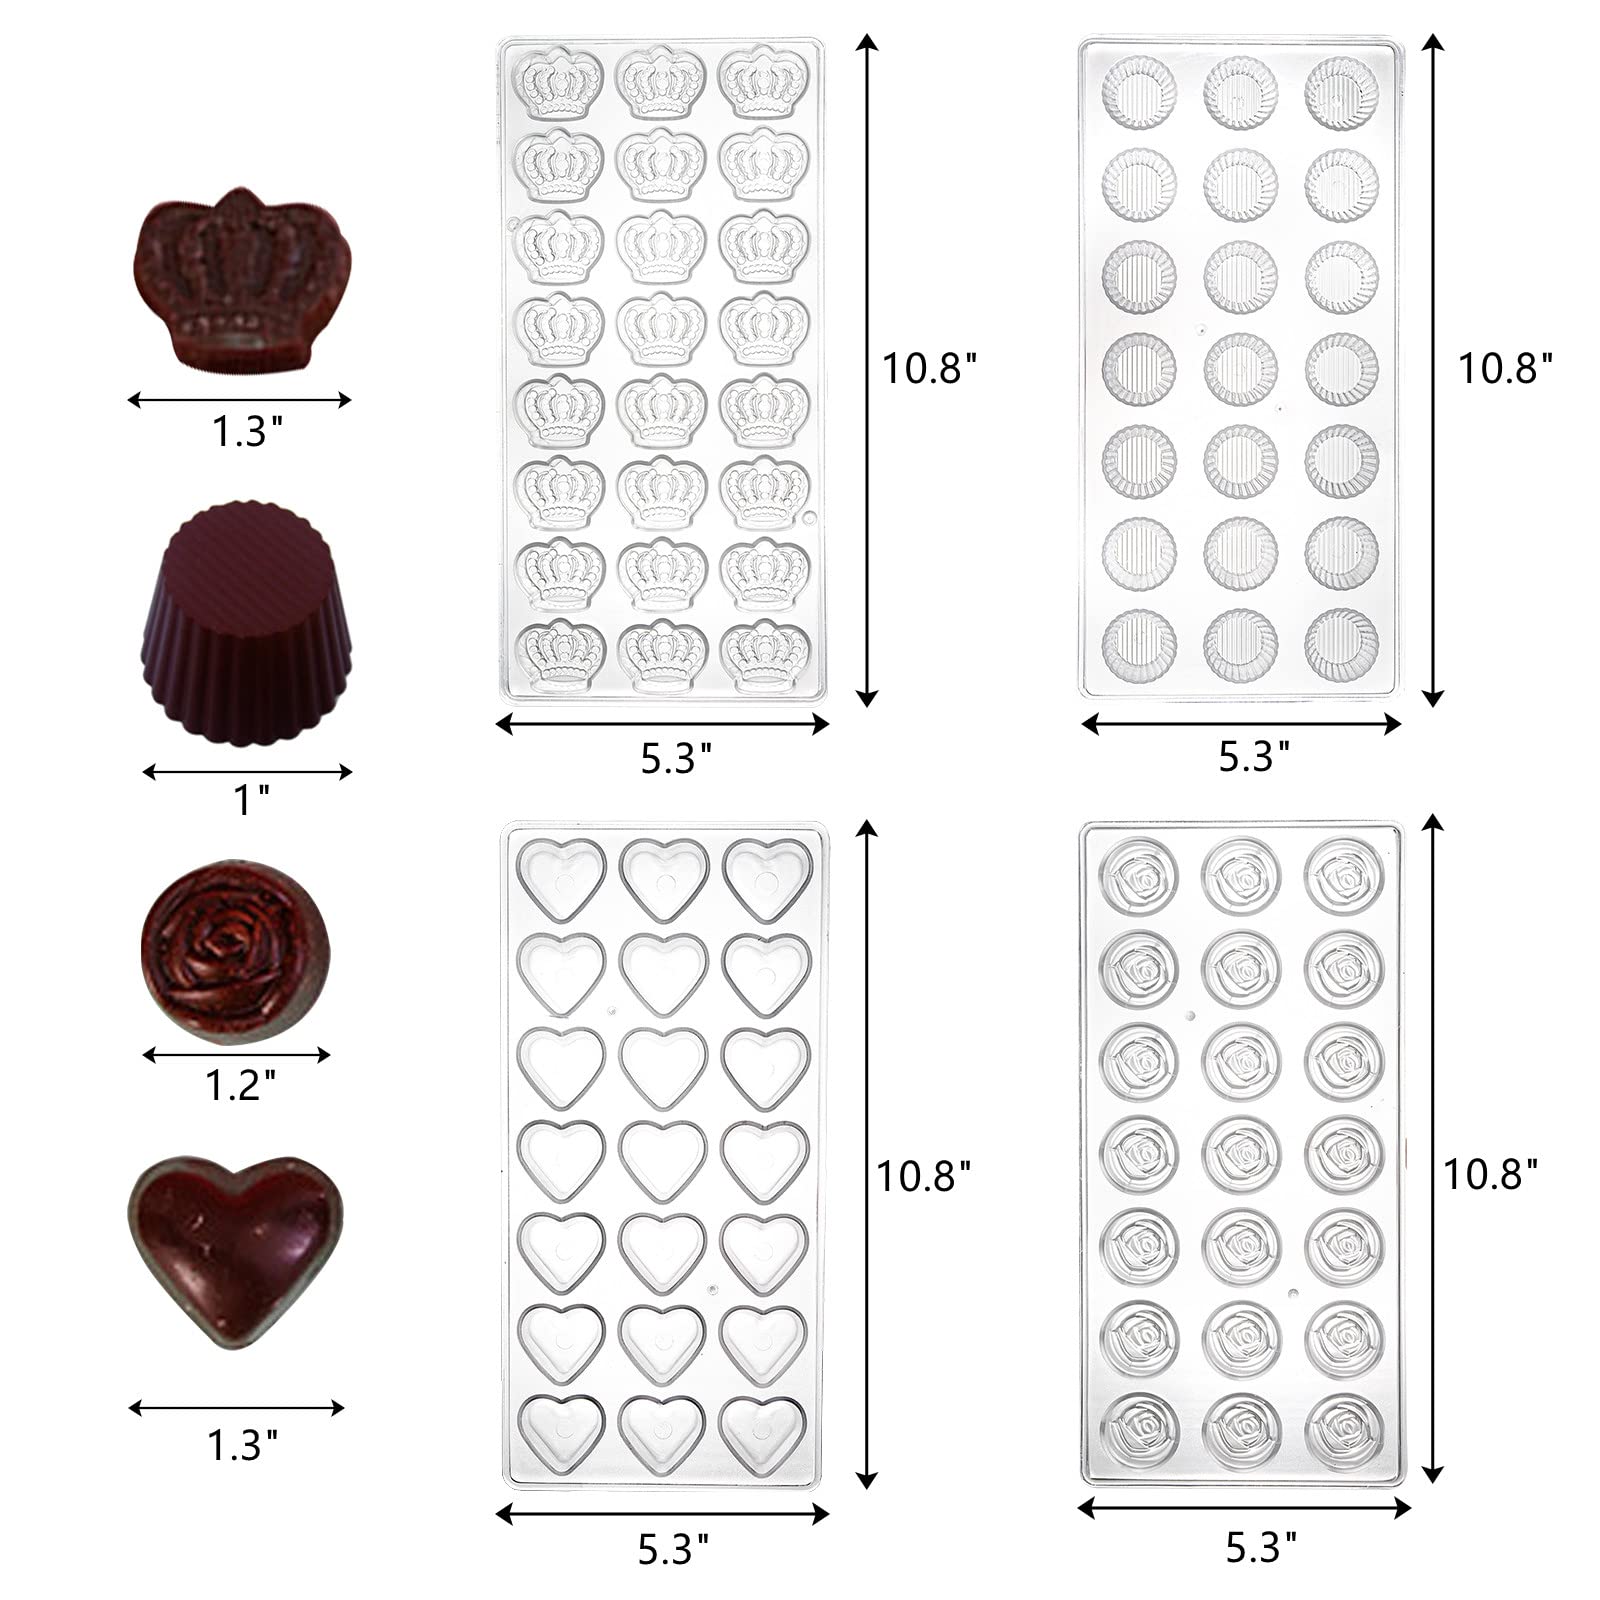 ZEAYEA 4 Pack Polycarbonate Chocolate Mold, Candy Making Mold, DIY Mold Cookie Tray for Mousse, Jelly, Candy, Chocolate, Cup, Heart, Rose, Crown Shape